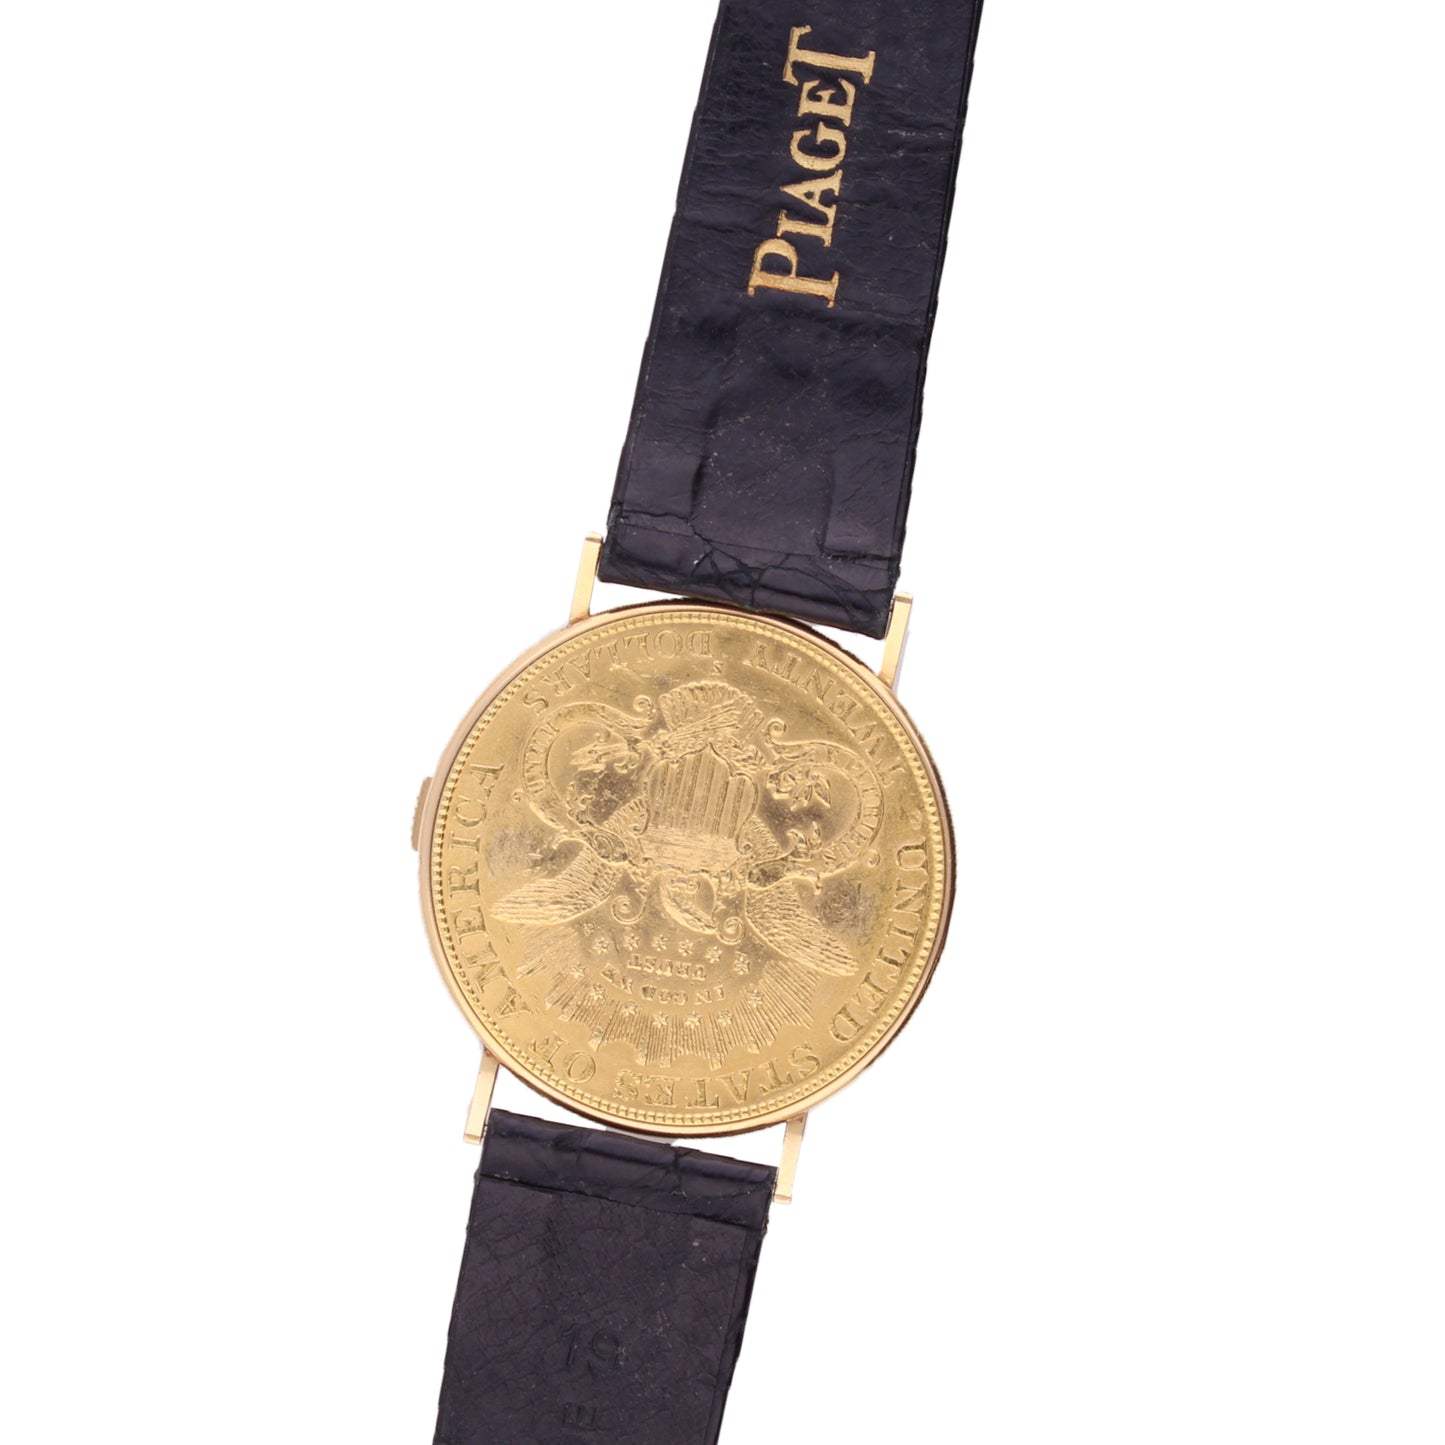 22ct/18ct yellow gold $20 coin wristwatch. Made 1975